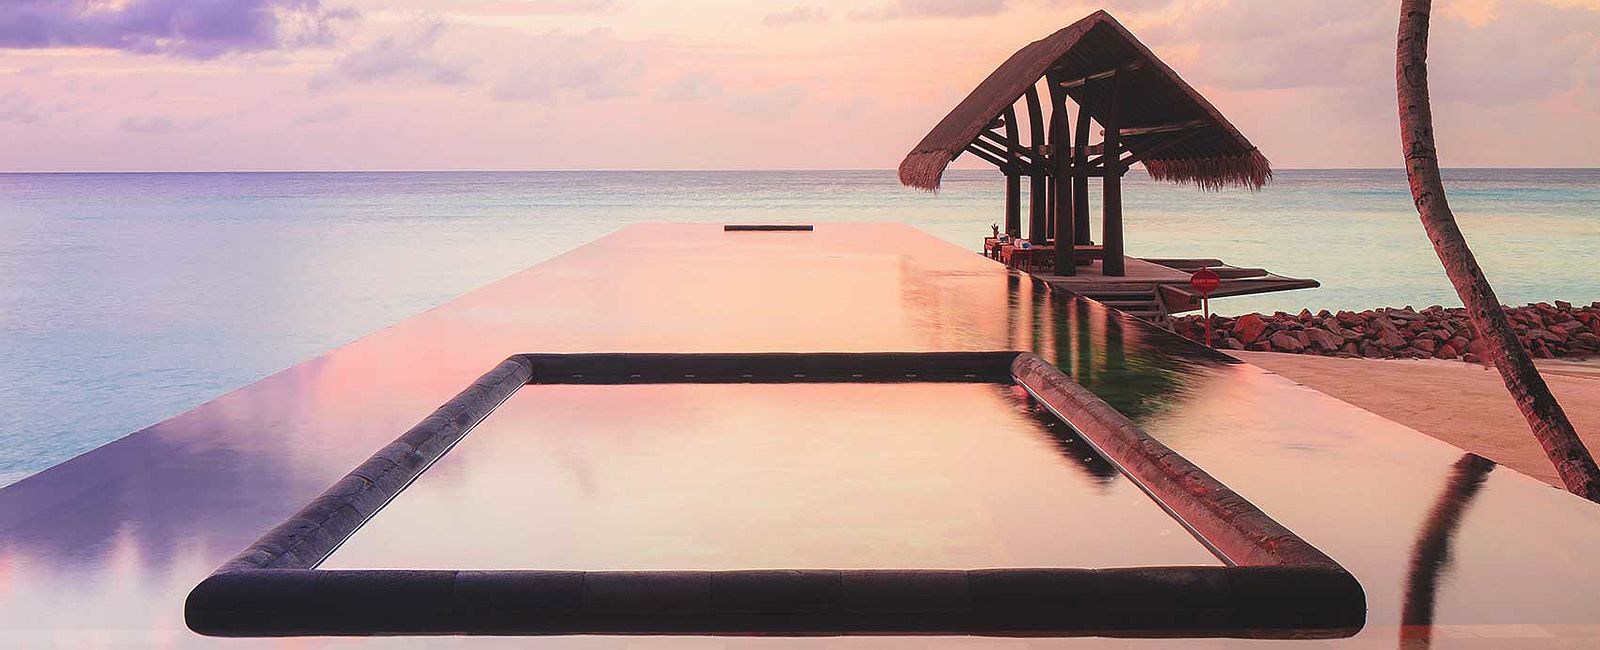 VERY SPECIAL HOTEL
 One&Only Reethi Rah 
 Ein Paradies nach Maß 